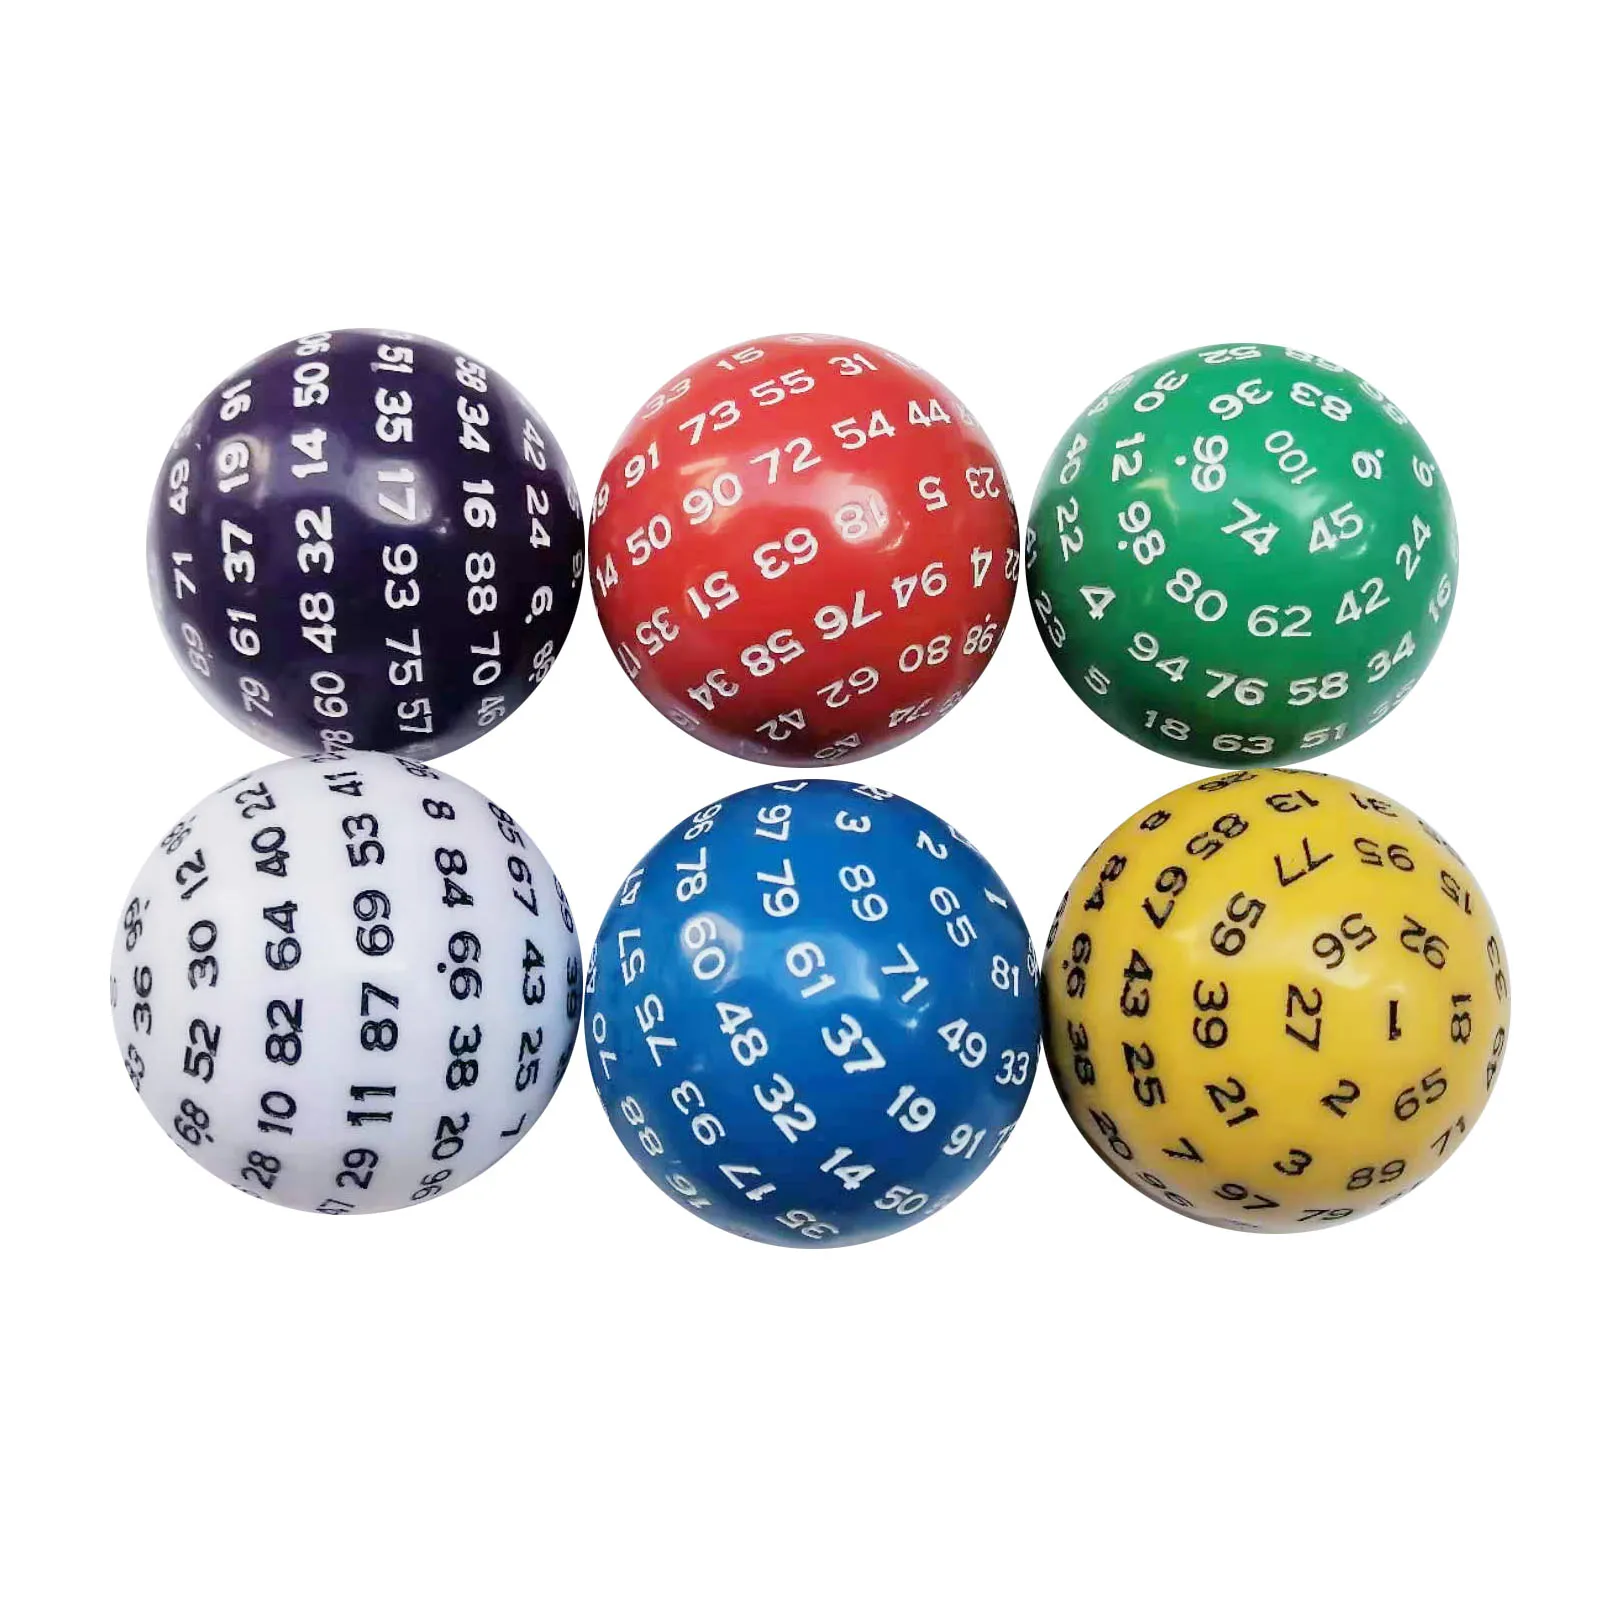 

D100 Multi Sided Acrylic Dices 100 Sides Polyhedral Dice for Table Board Game Role Playing Game Bar Club Party D100 Game Dice